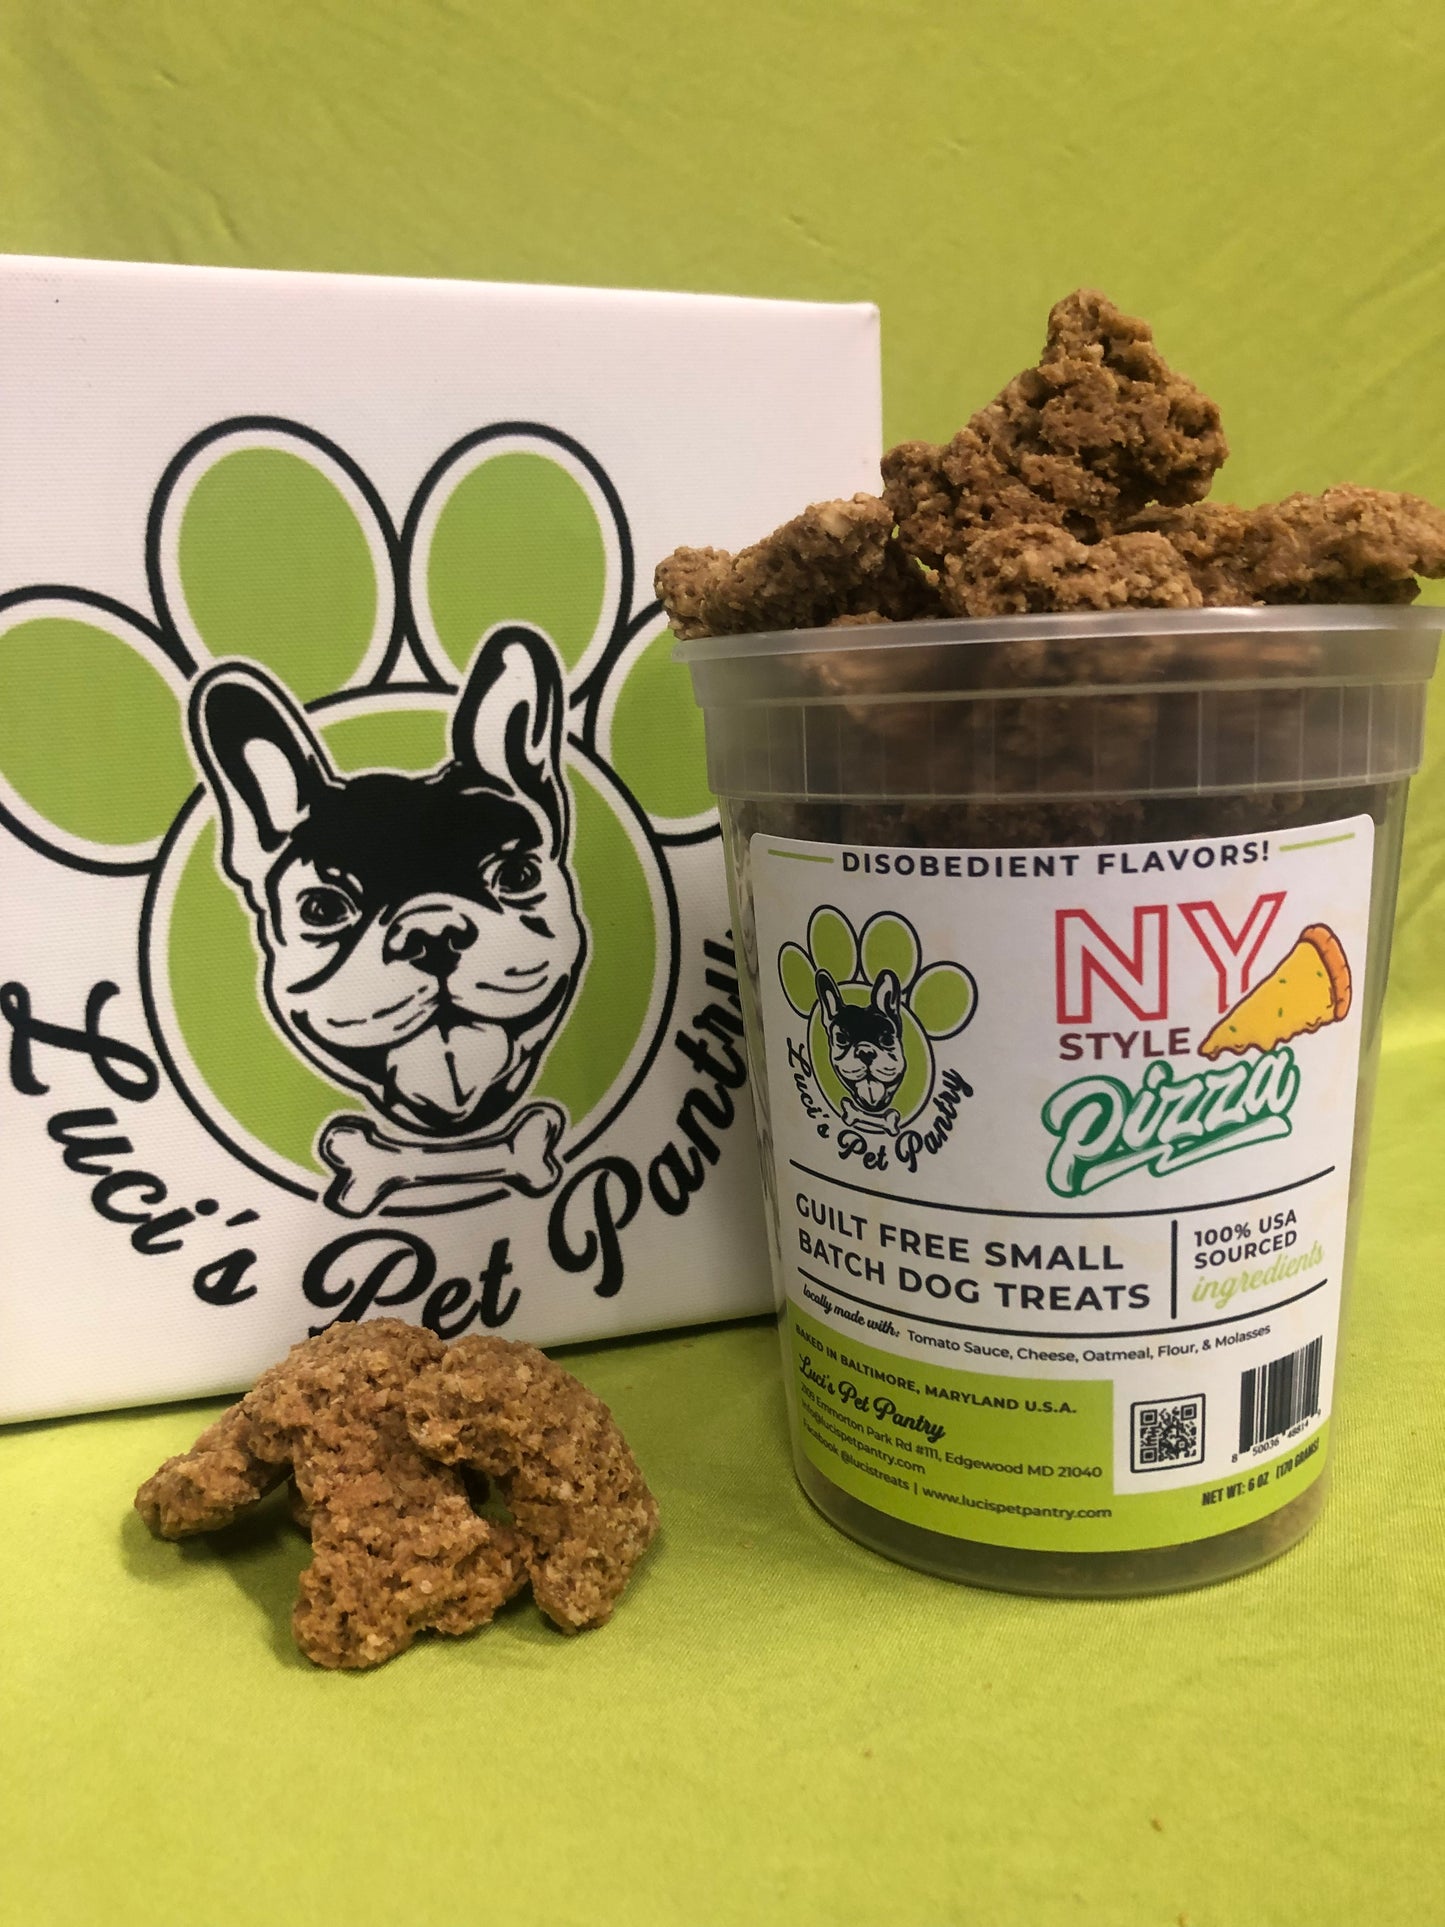 NY Style Pizza - All Natural "Tomato & Cheese" Dog & Puppy Treats - Disobedient Tub of Biscuits